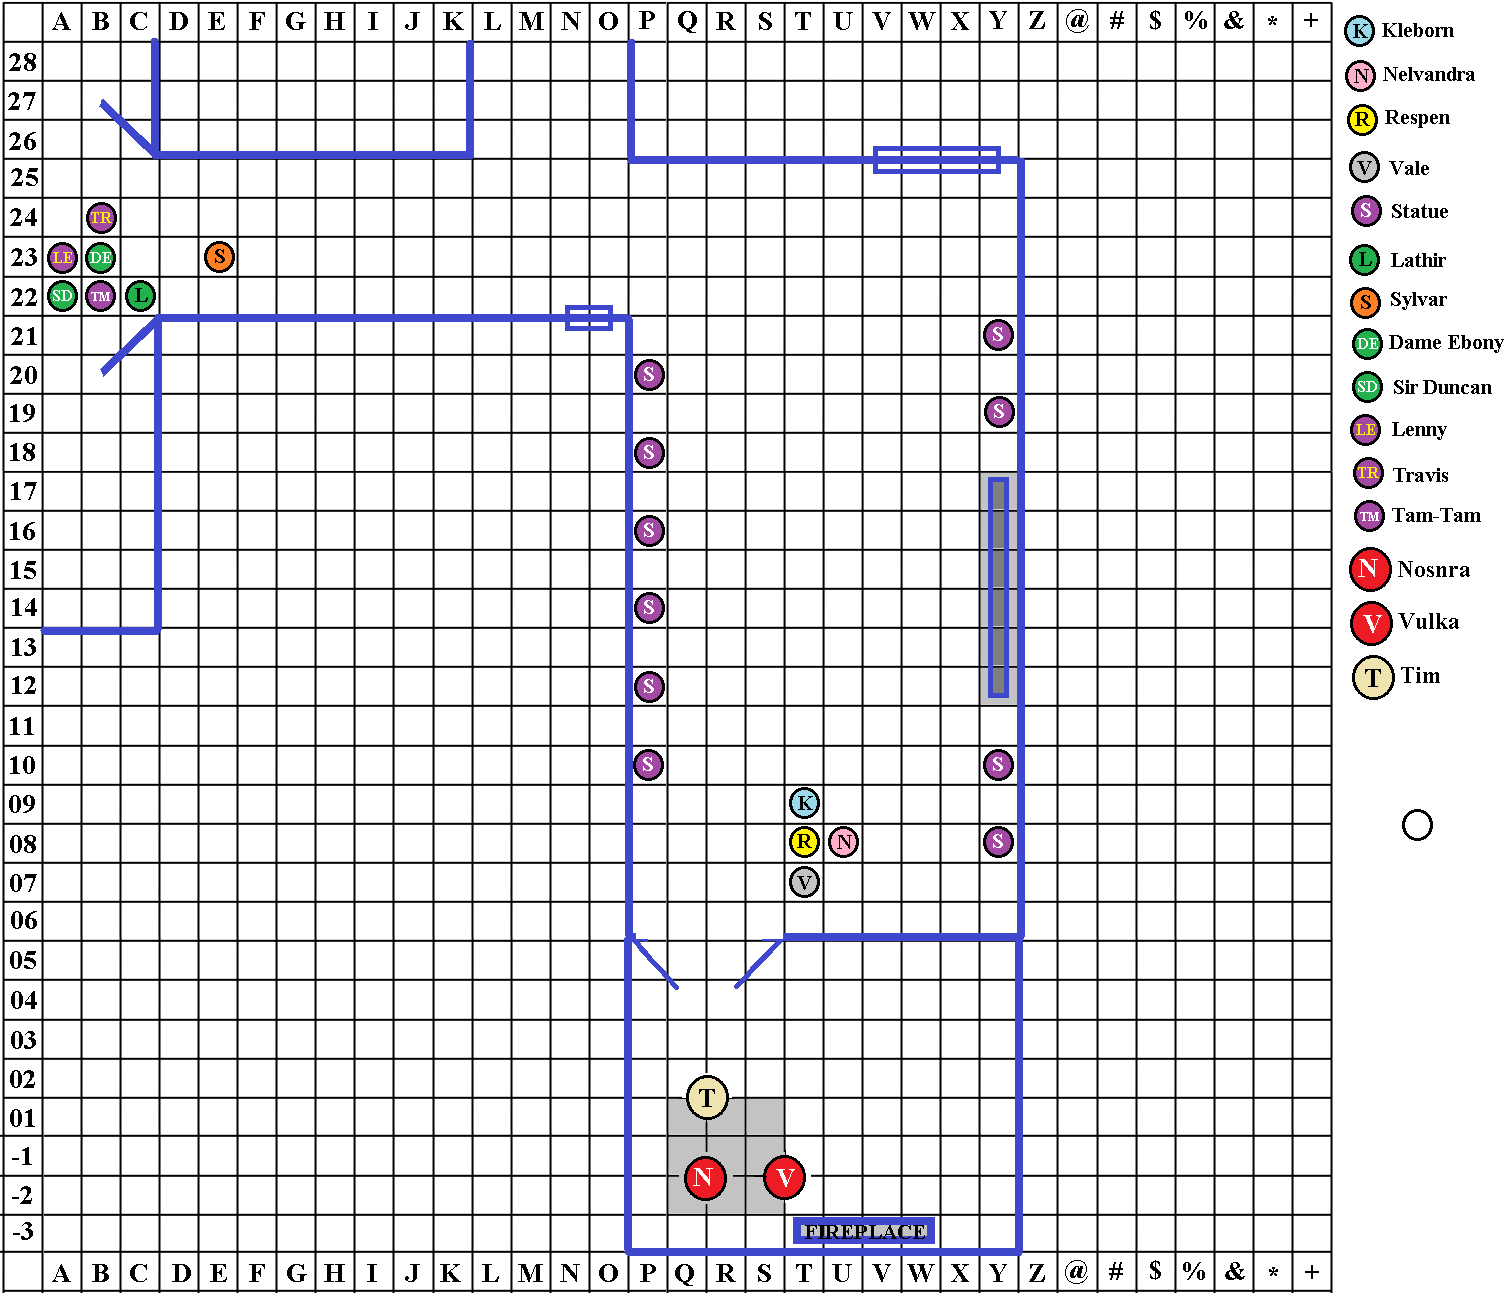 00-Giant-Steading-Hallway-Map-001-A3.png